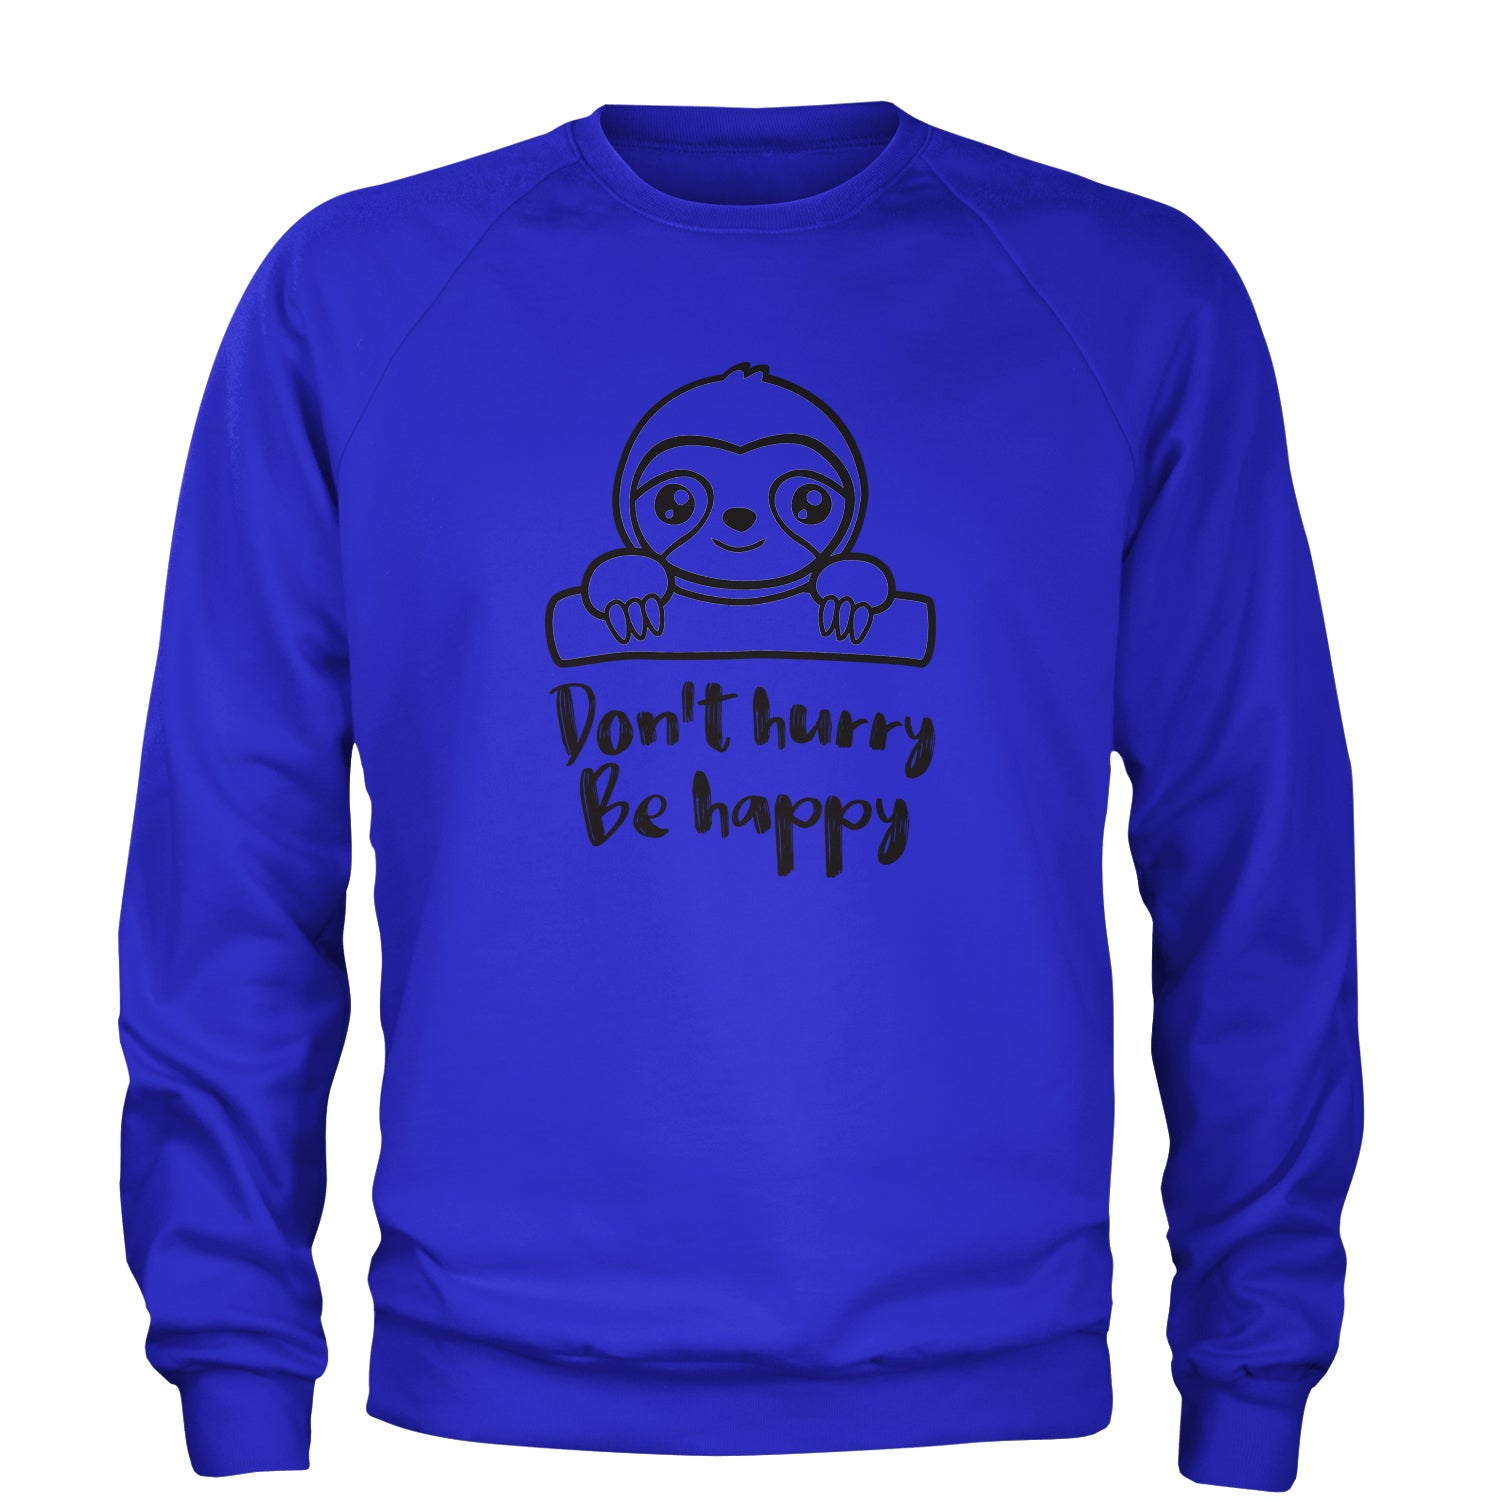 Sloth Don't Hurry Be Happy Adult Crewneck Sweatshirt fun, funny, sloth, sloths by Expression Tees